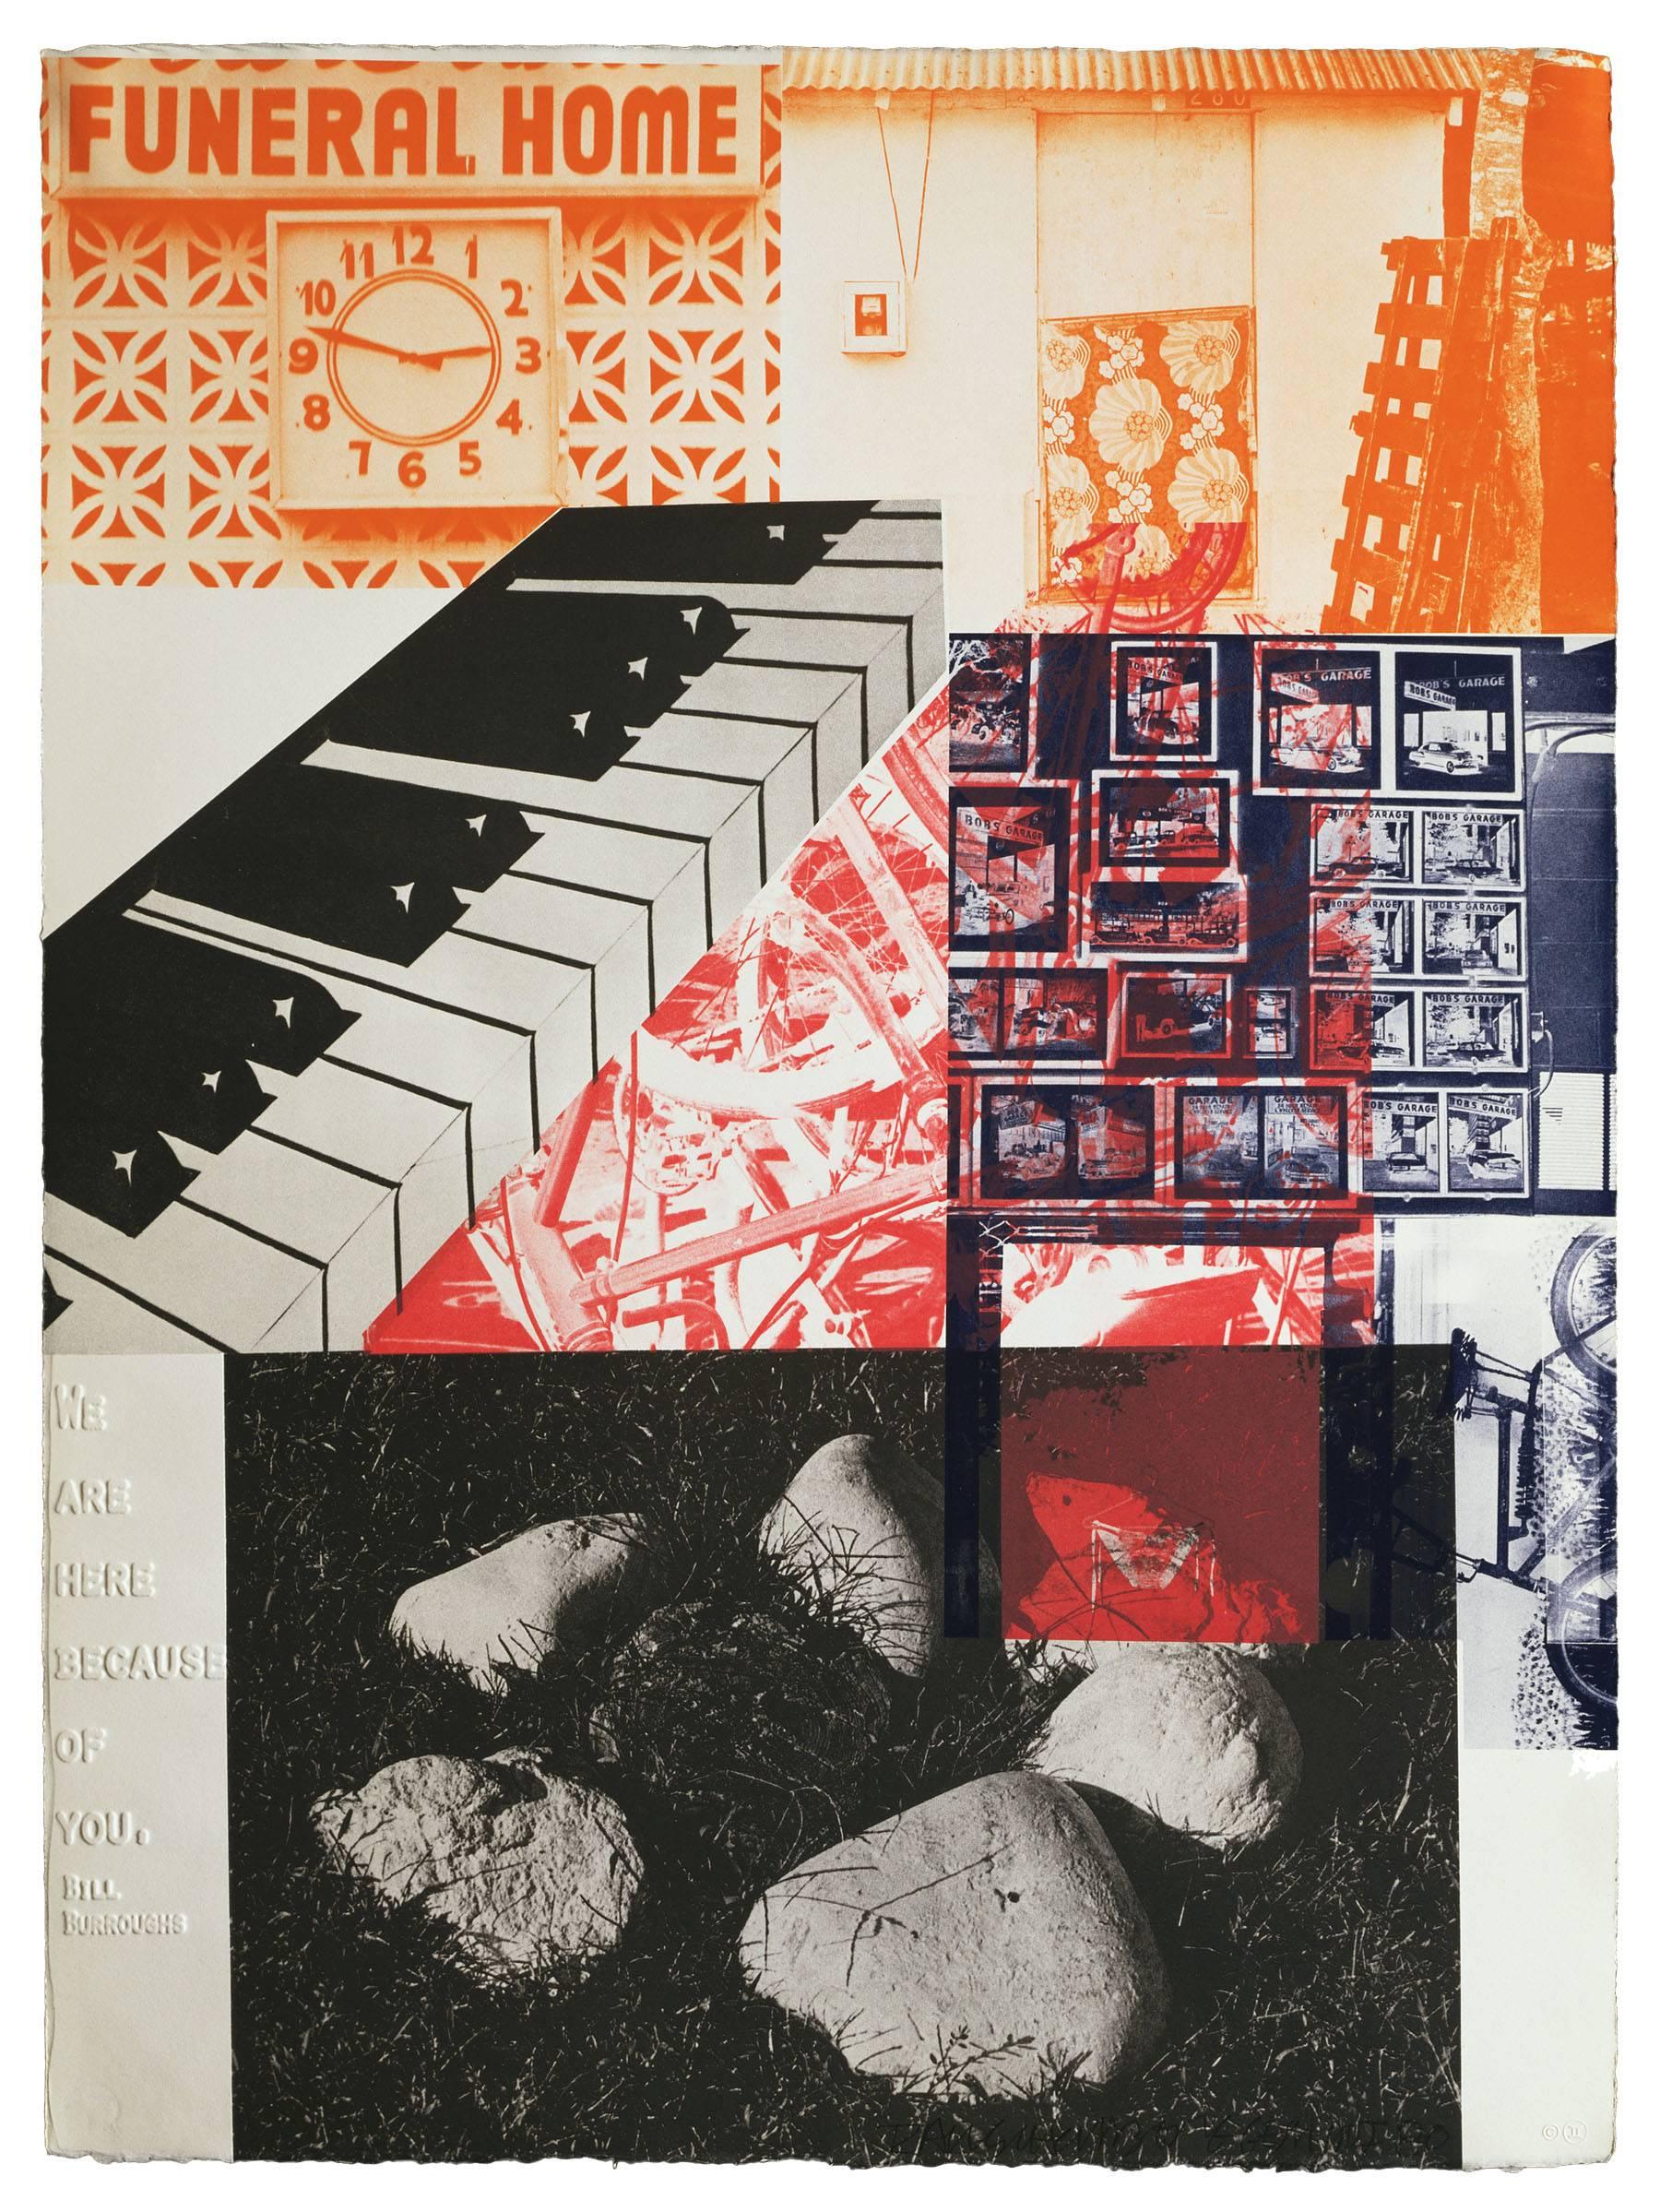 American Pewter with Burroughs VI - Print by Robert Rauschenberg